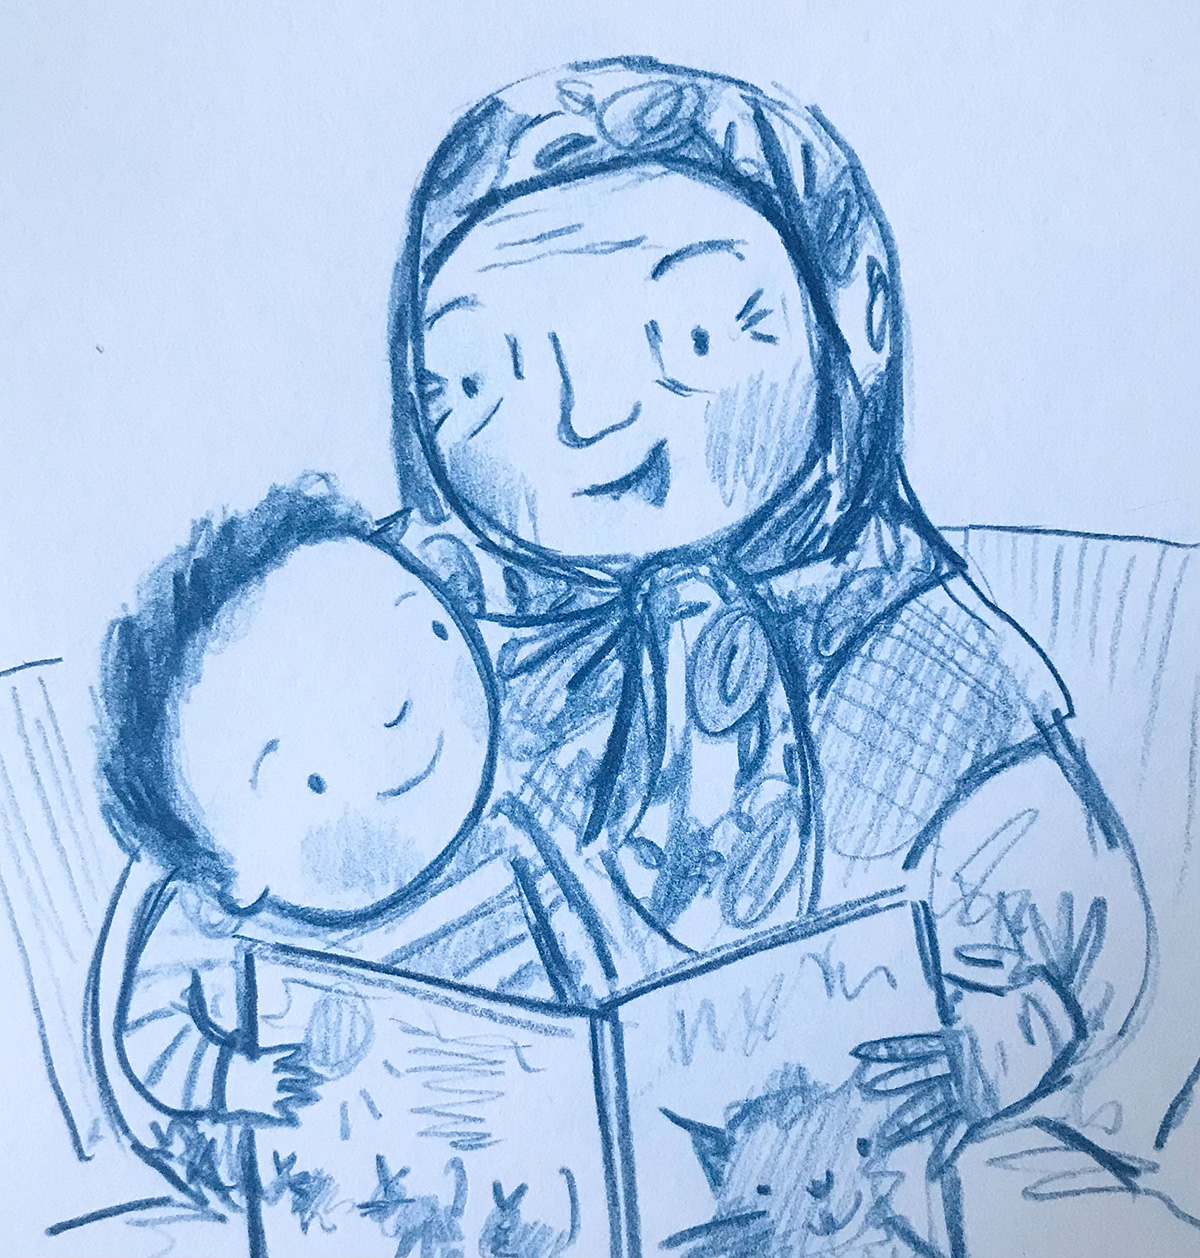 Illustration by Karen George of a grandmother and small child reading a book with a cat on it